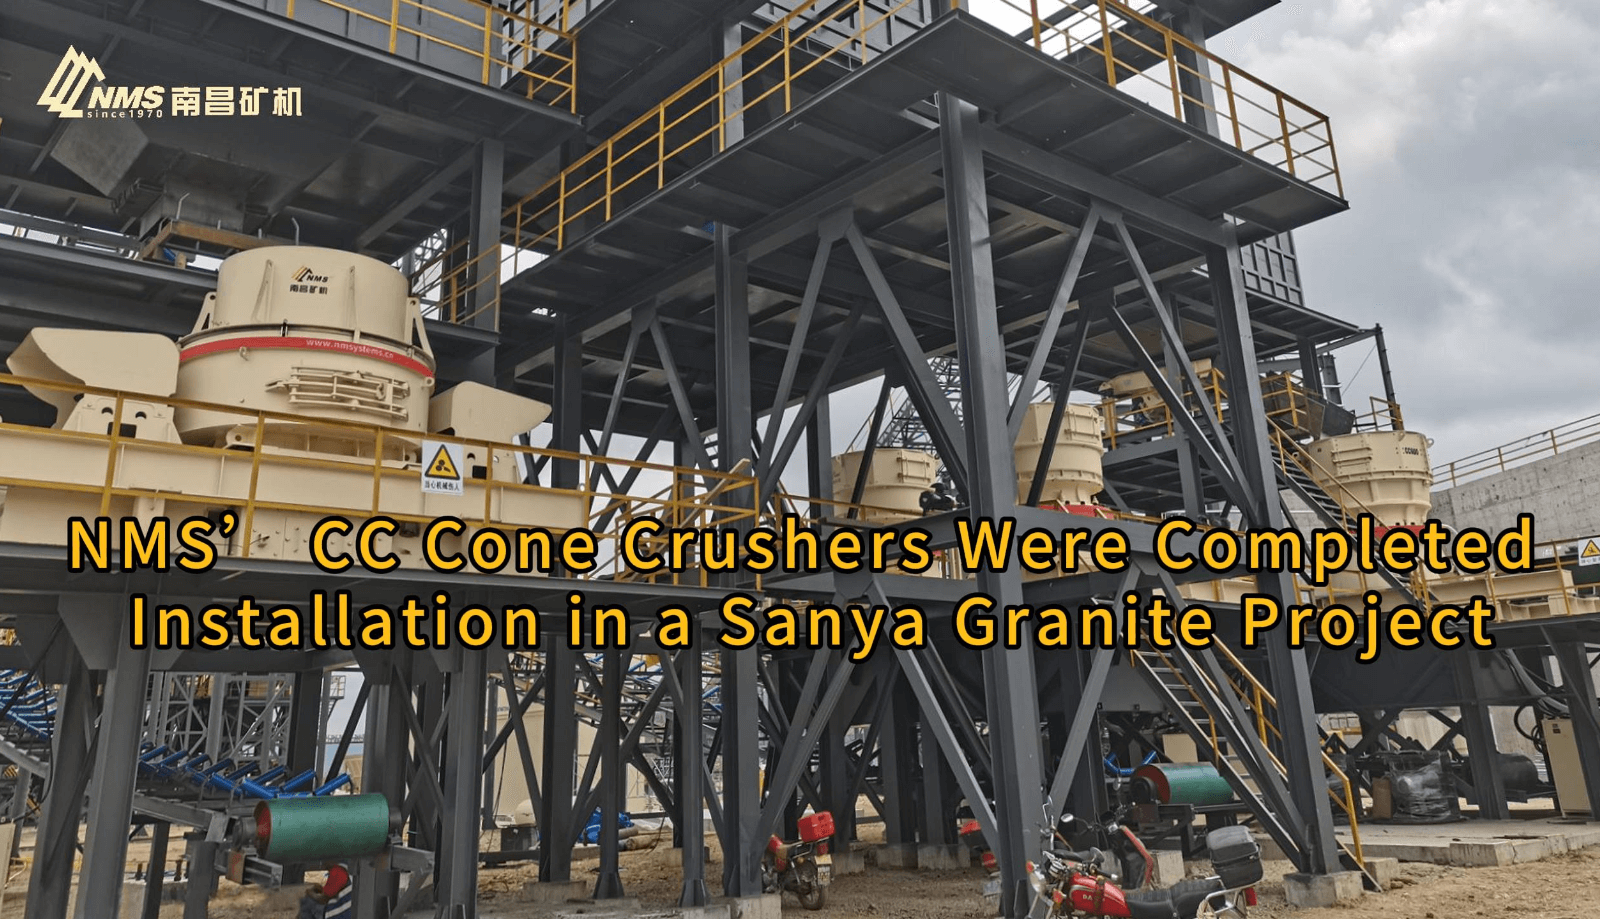 NMS’ CC Cone Crushers Were Completed Installation in a Sanya Granite Project